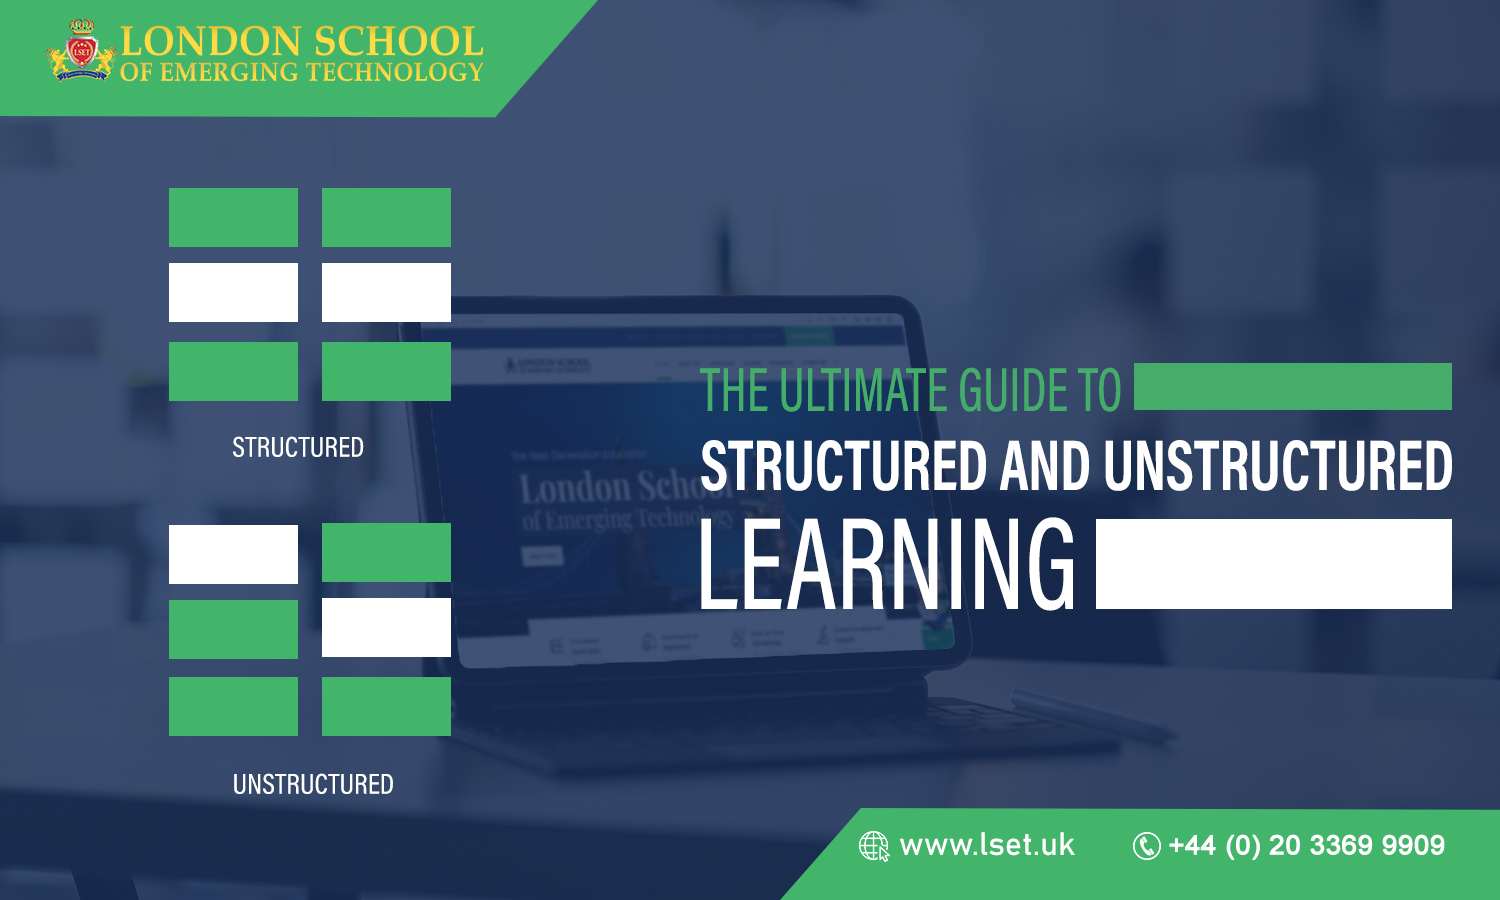 The Ultimate Guide to Structured and Unstructured Learning